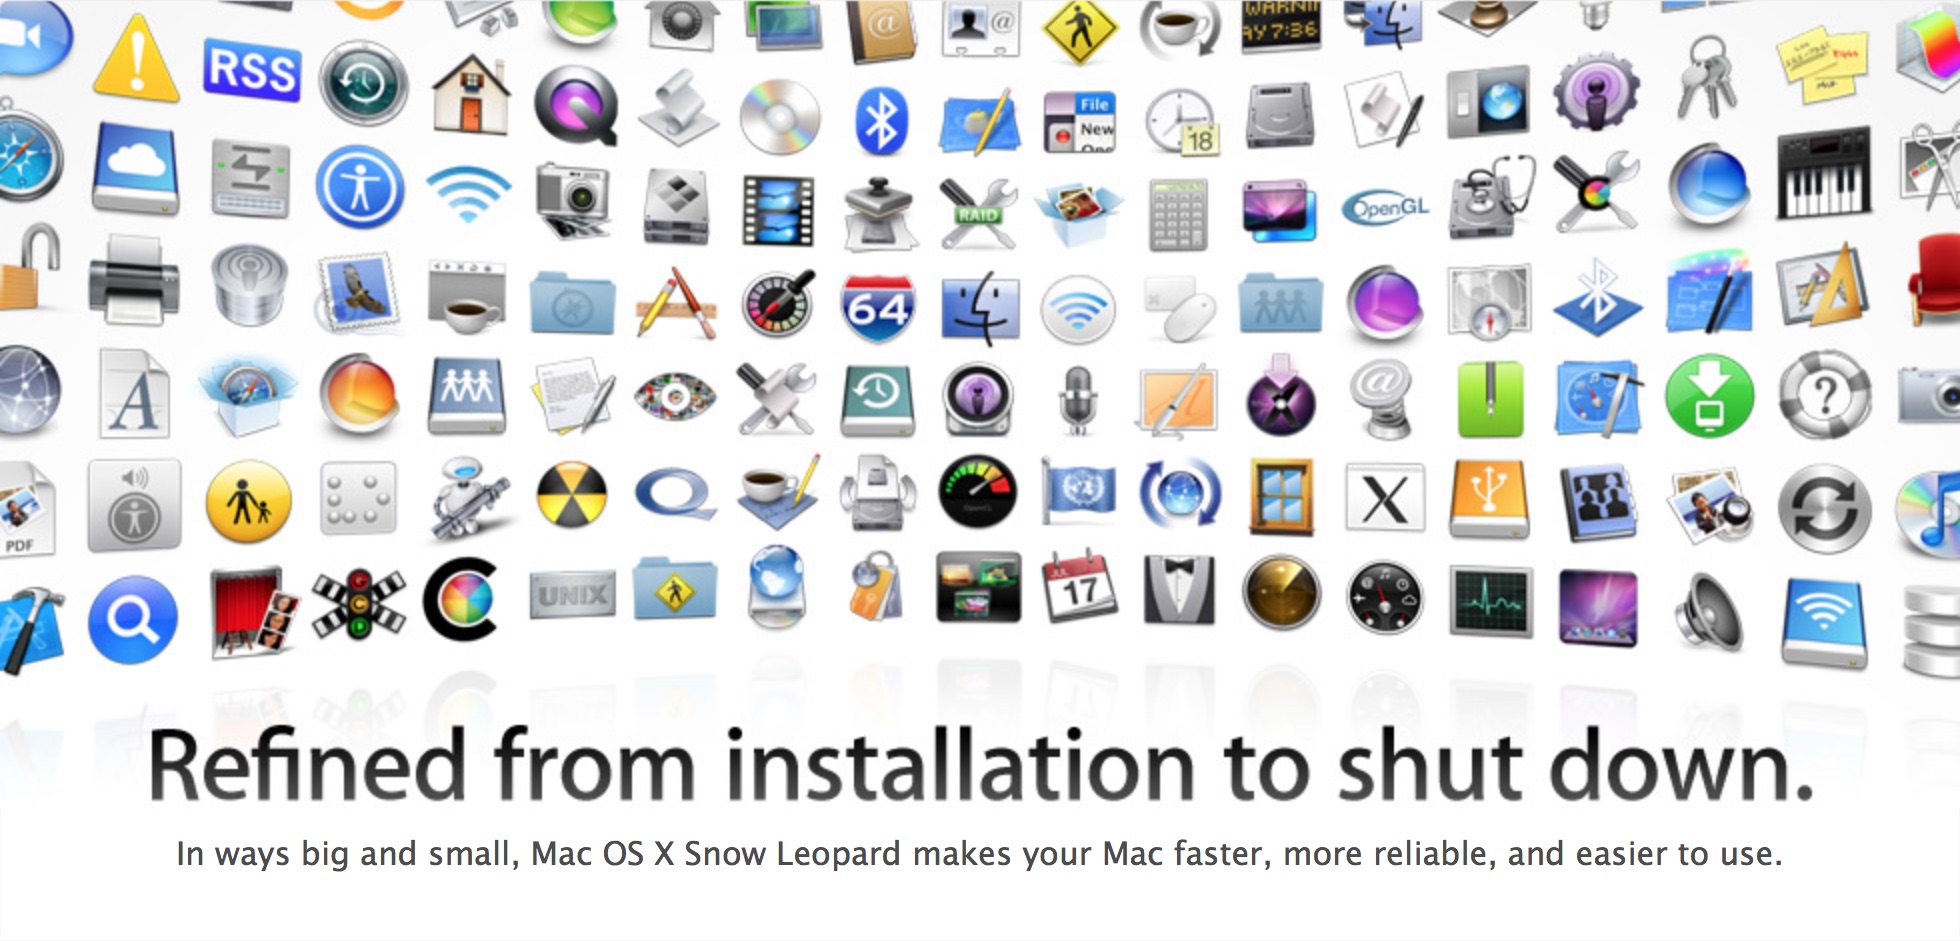 best browser for mac os lion